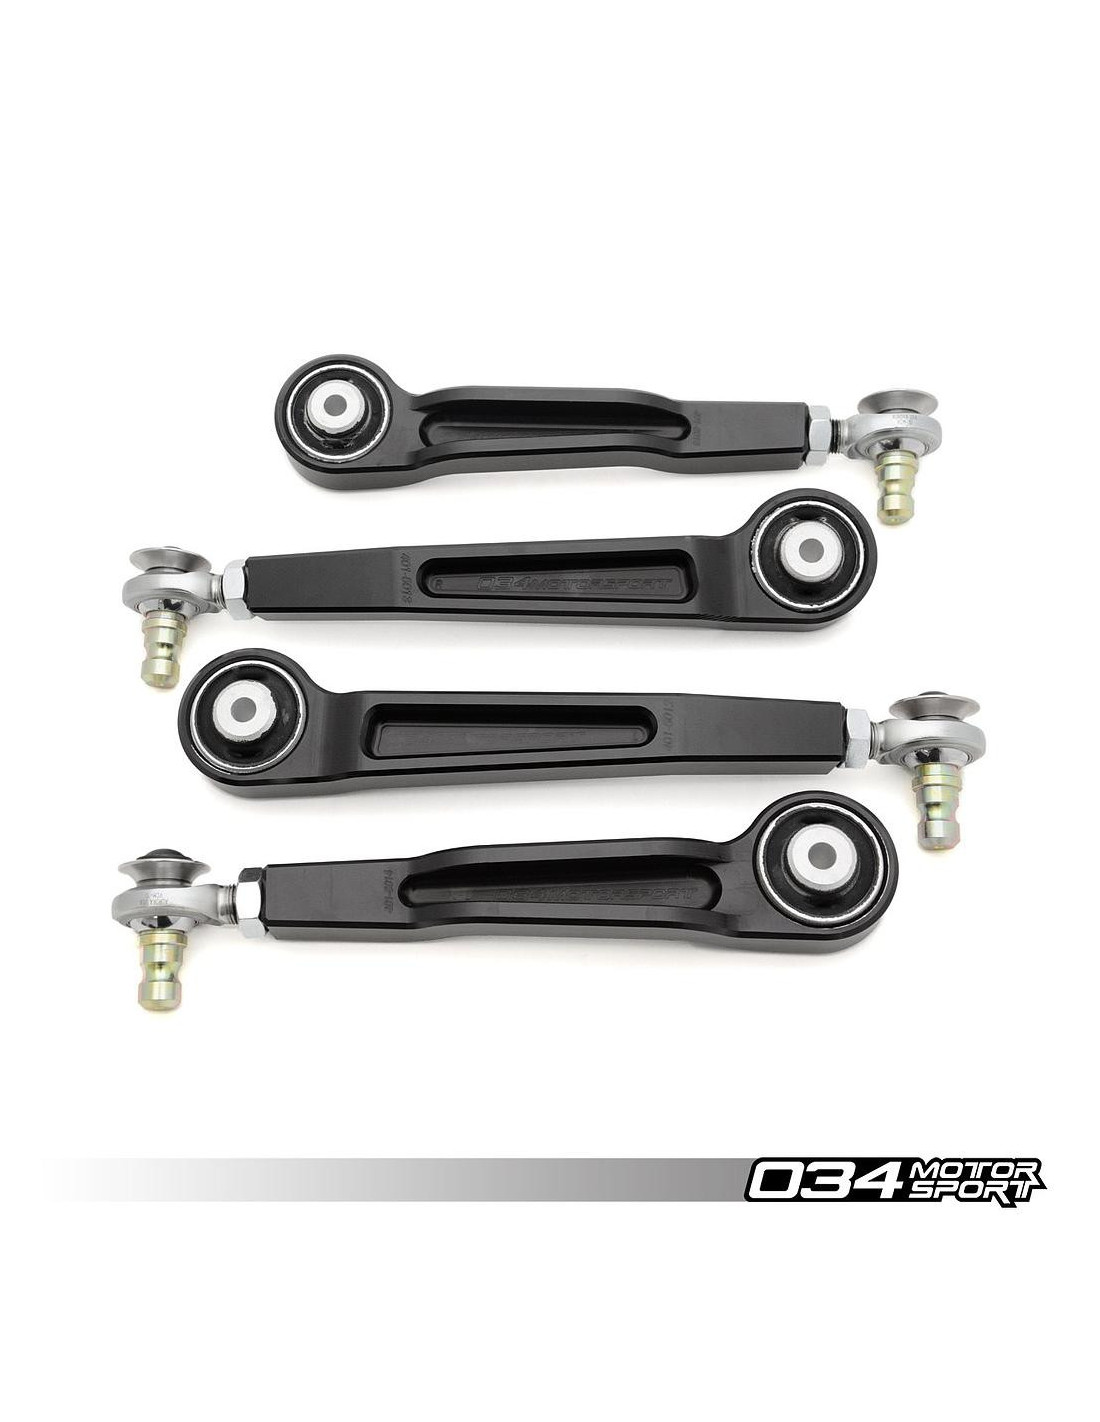 Uniball 034Motorsport Adjustable front suspension arms For A4 S4 B5 B6 B7  RS4 B5 B7 S6 RS6 C5